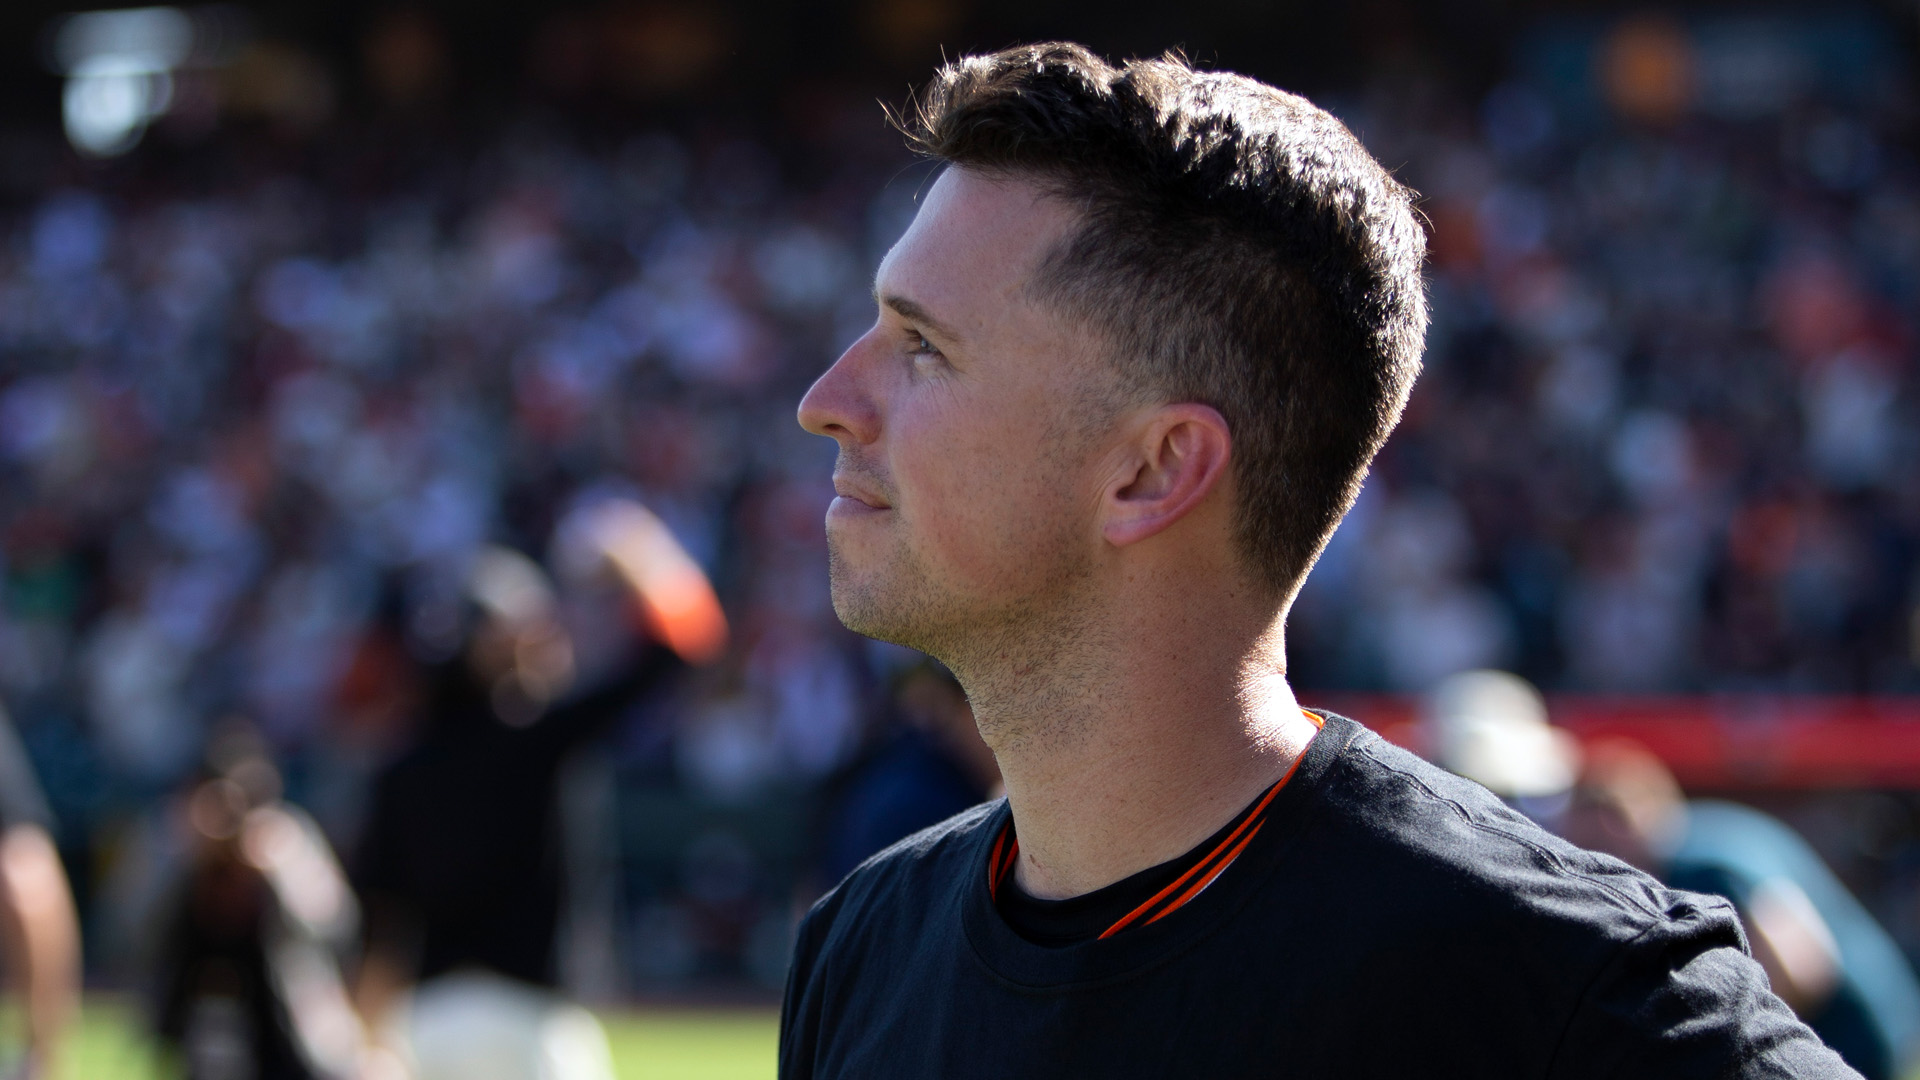 SF Giants' Buster Posey set to announce retirement on Thursday, per report  – Daily Democrat